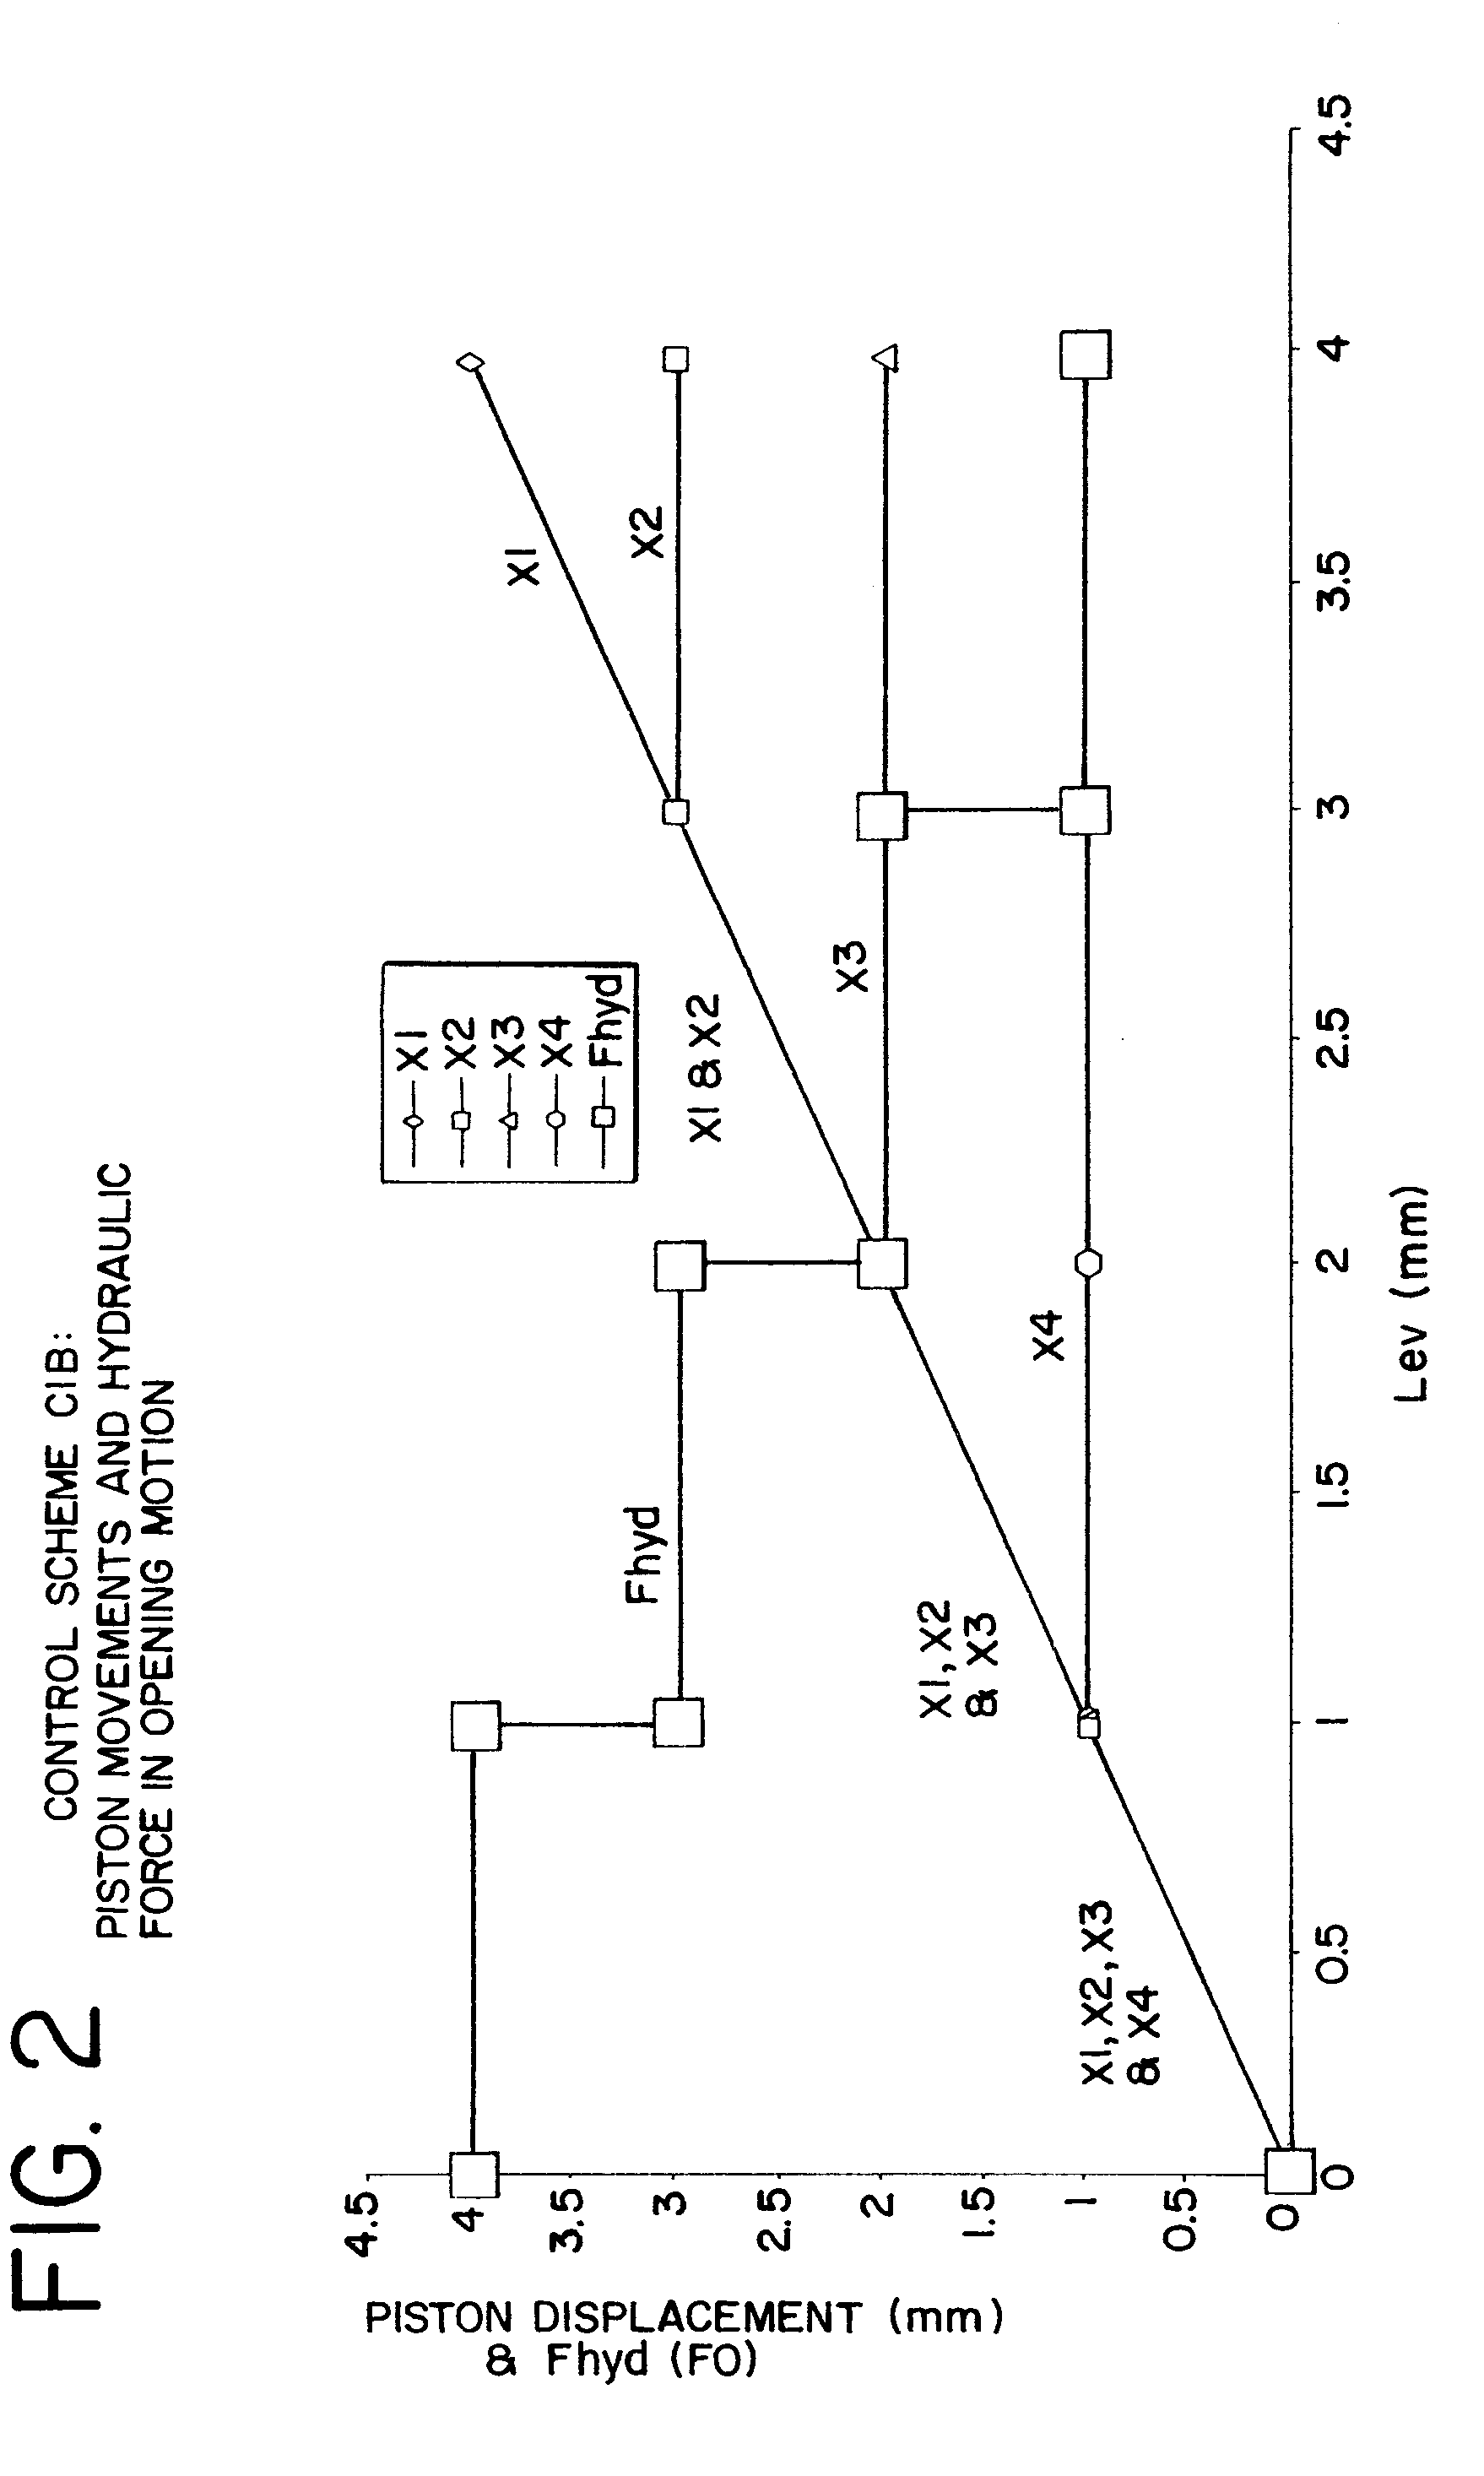 Variable engine valve control system